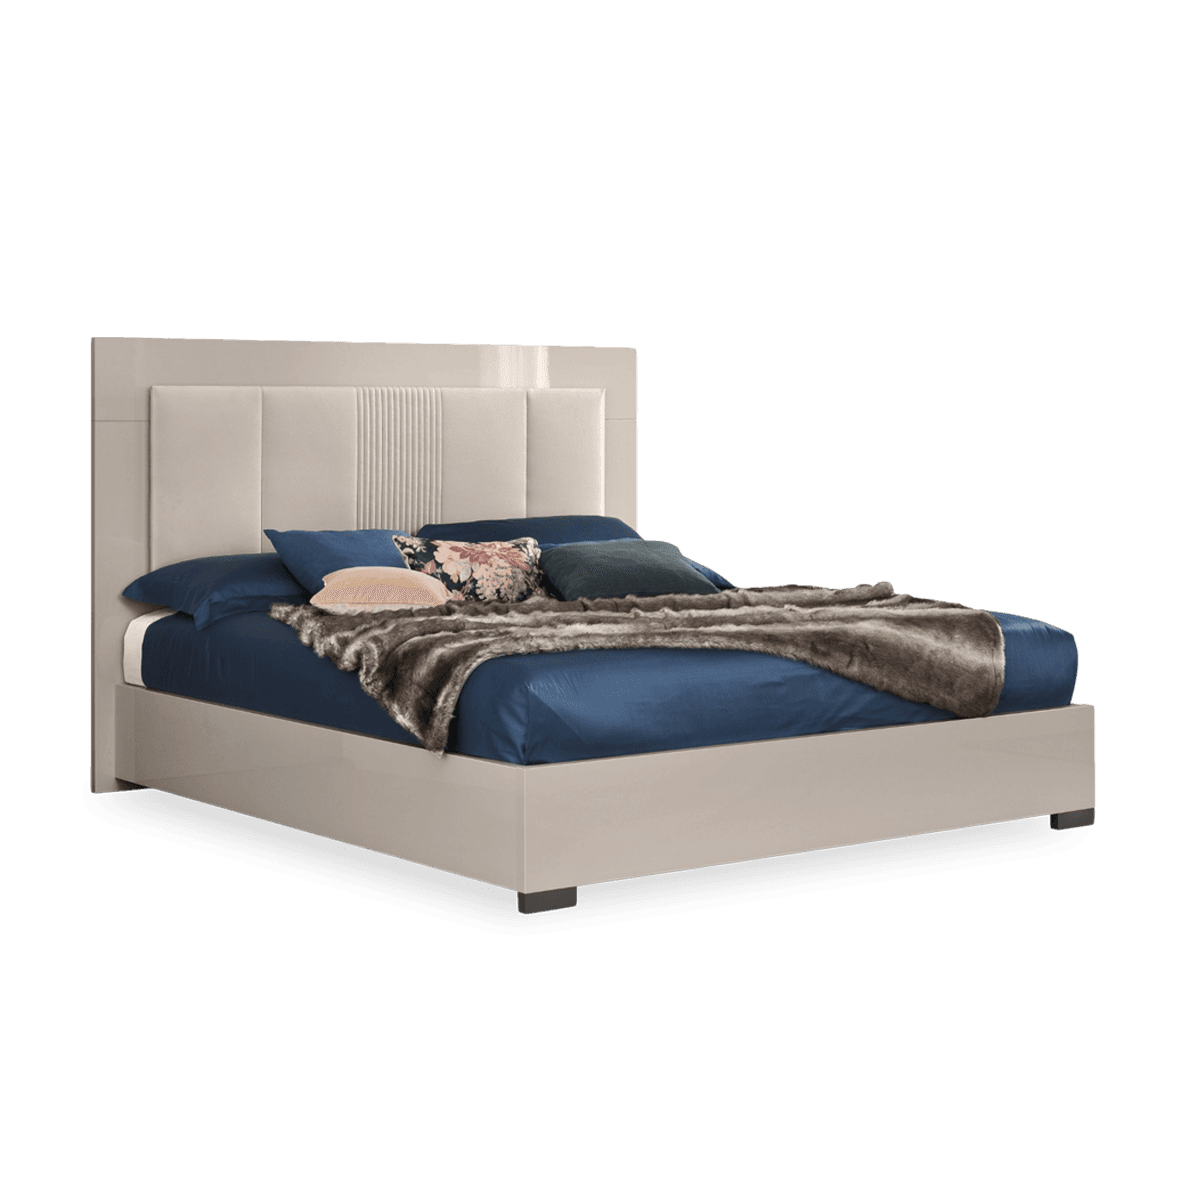 Claire Ks Bed Pearl Line